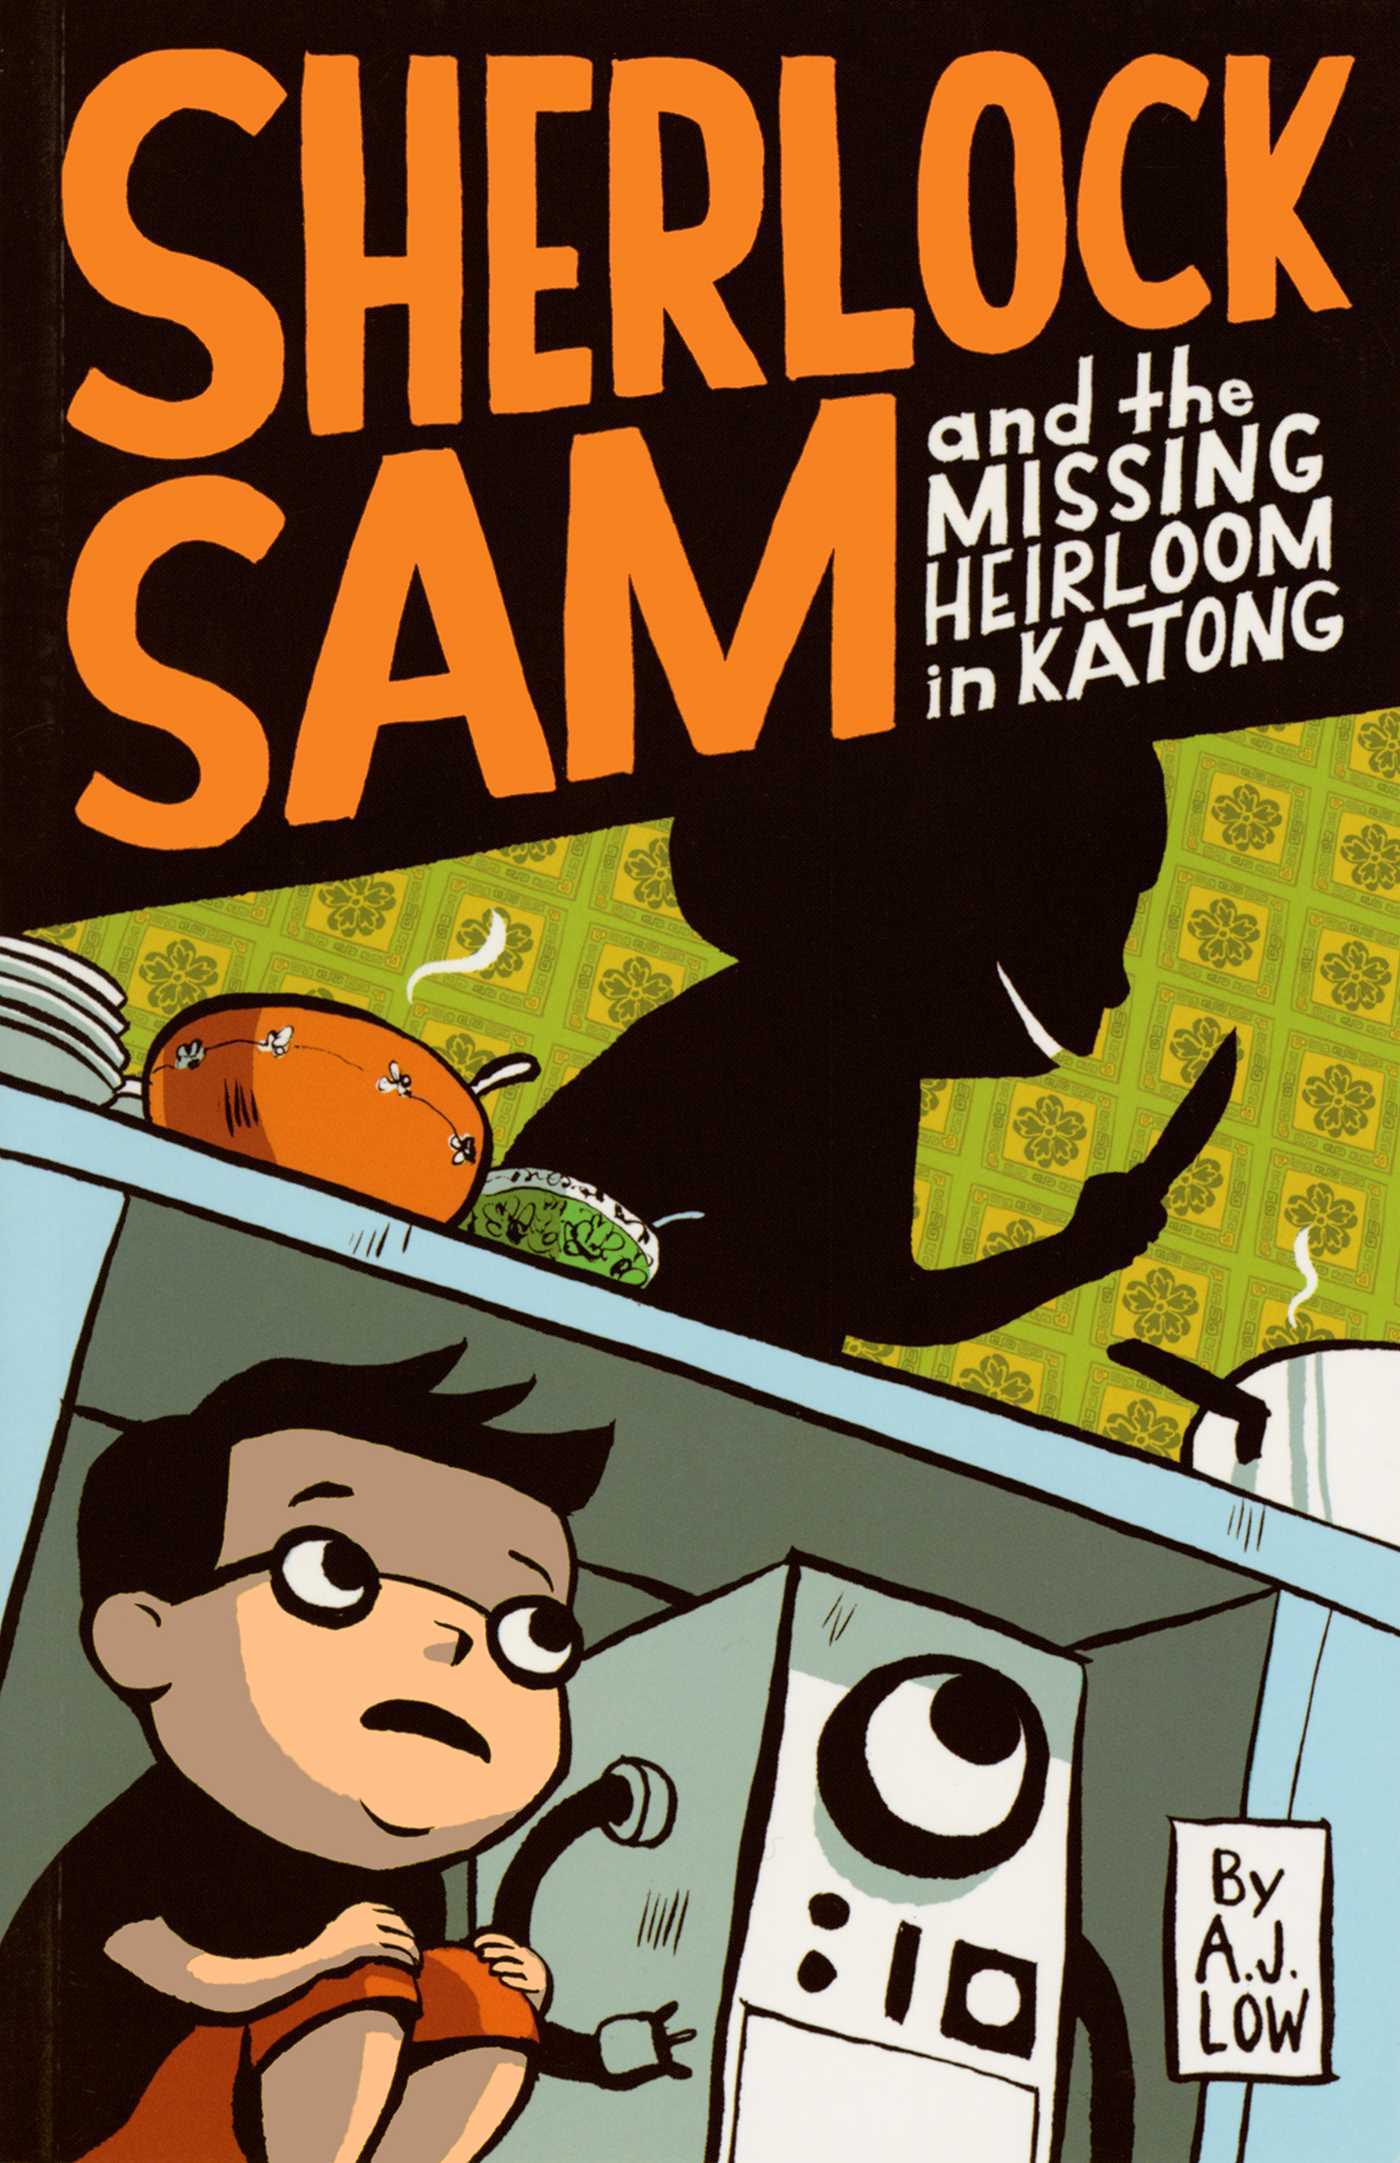 Image for "Sherlock Sam and the Missing Heirloom in Katong"